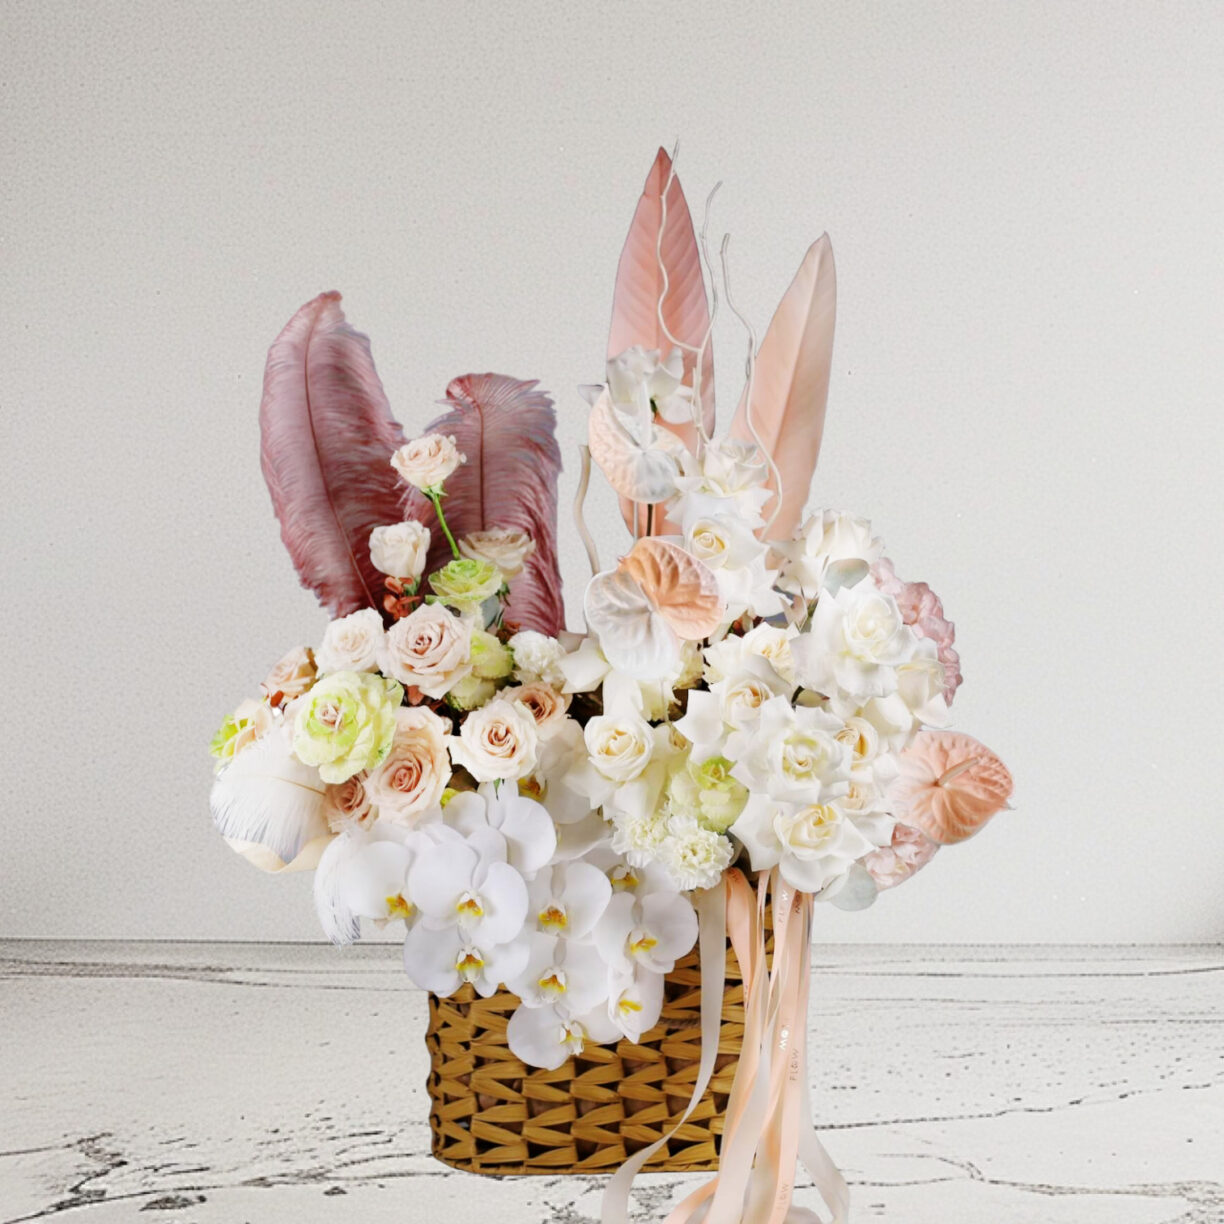 Essence Photoroom The Perfect Housewarming Gift: Why Flower Arrangements Make the Best Present for Your Friends’ New Home